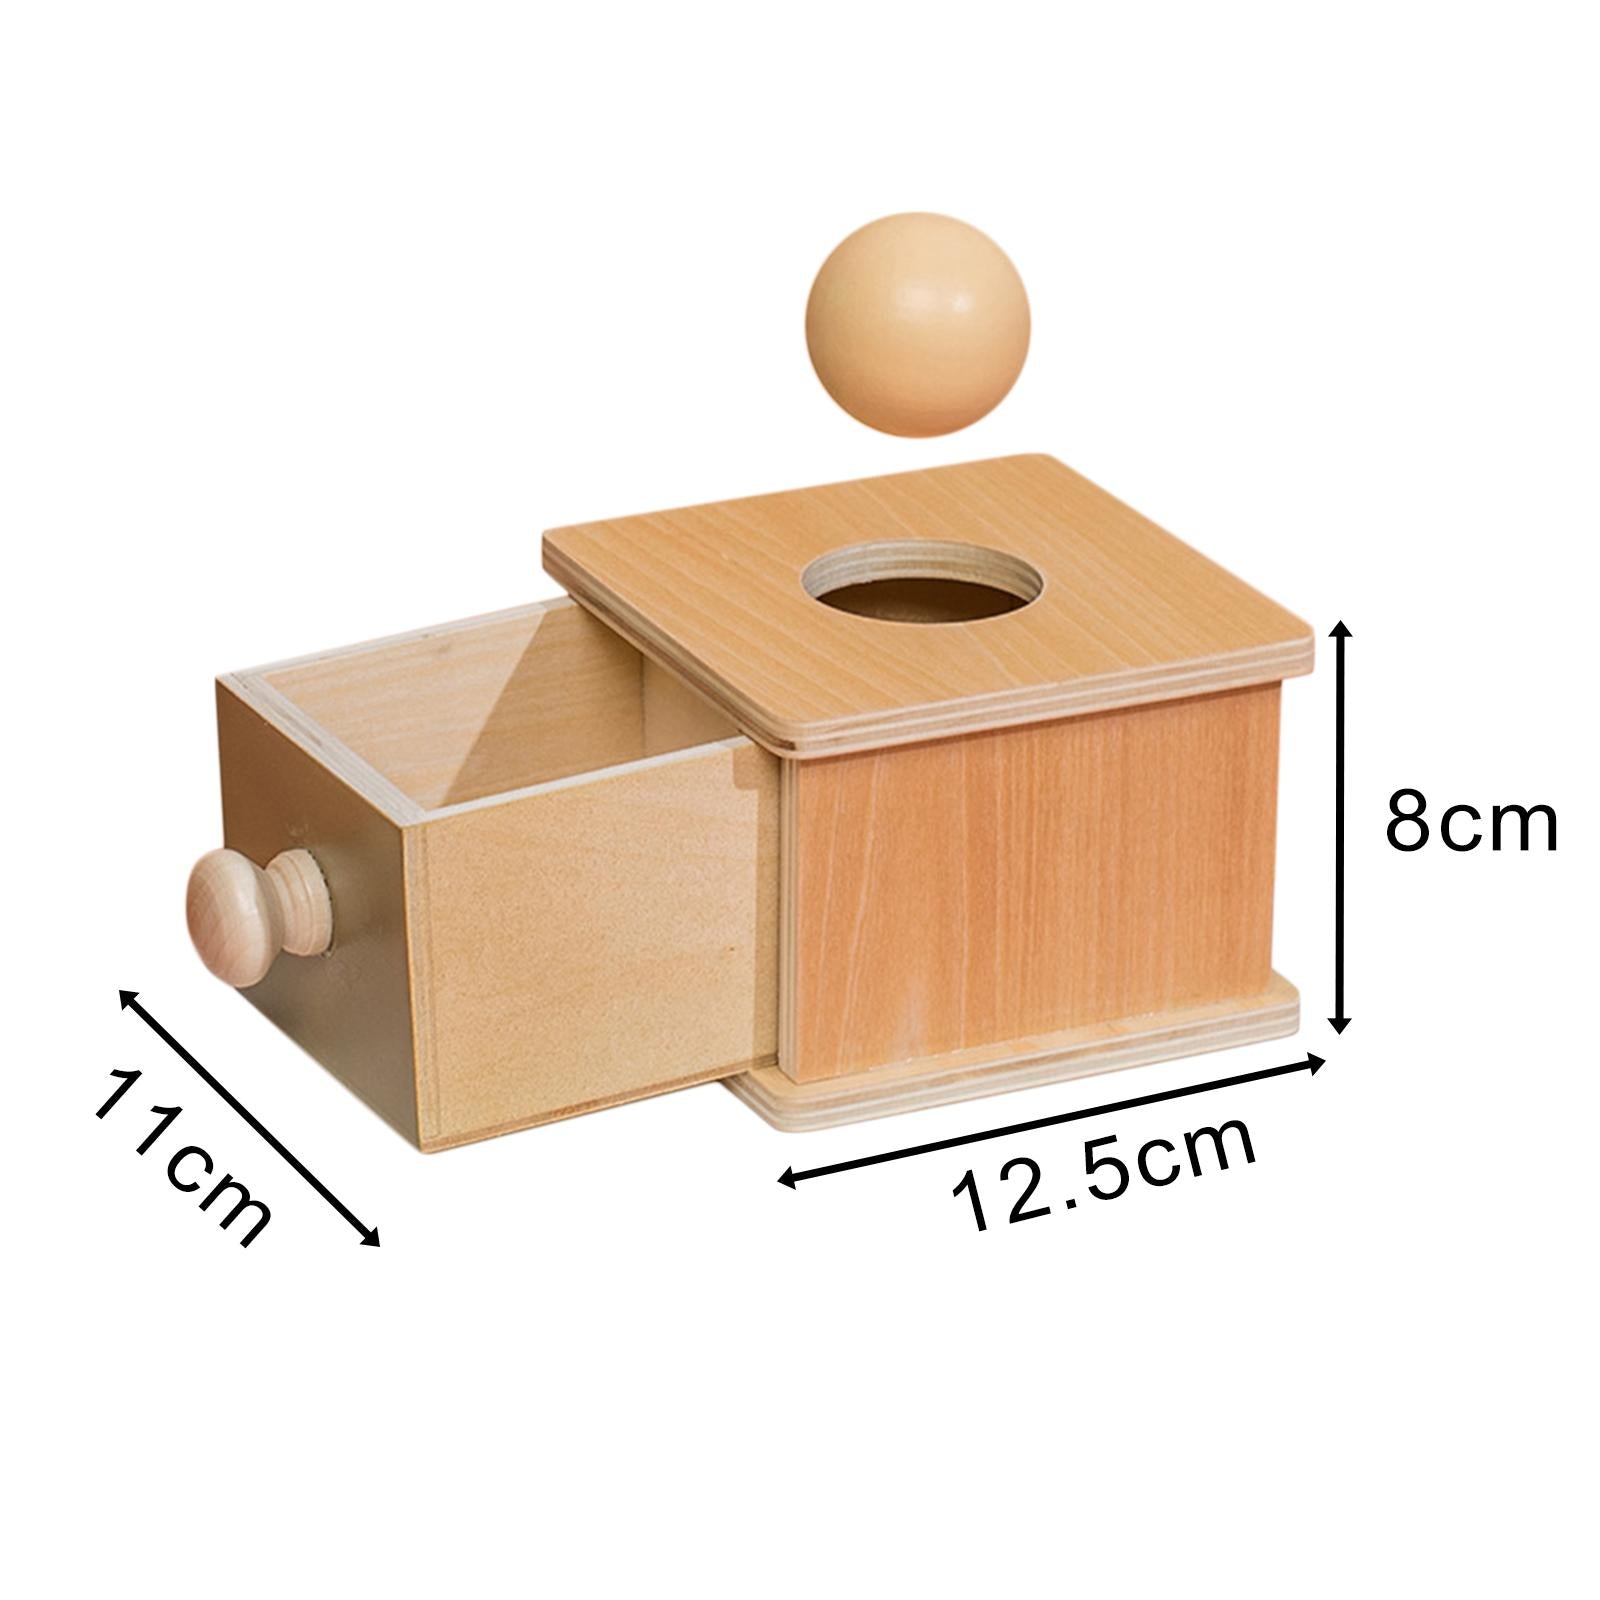 Wooden object permanence box, drawer open with ball hovering above and dimensions shown in picture (11cm x 12.5 cm x 8cm)